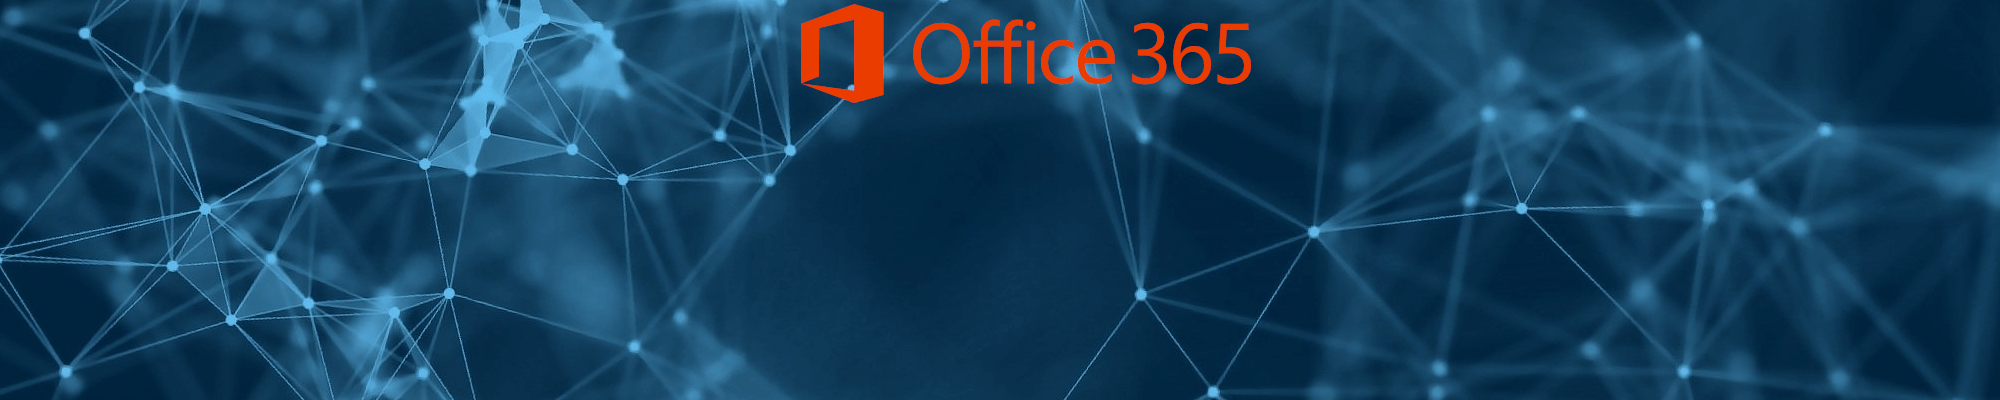 Messagerie Office 365